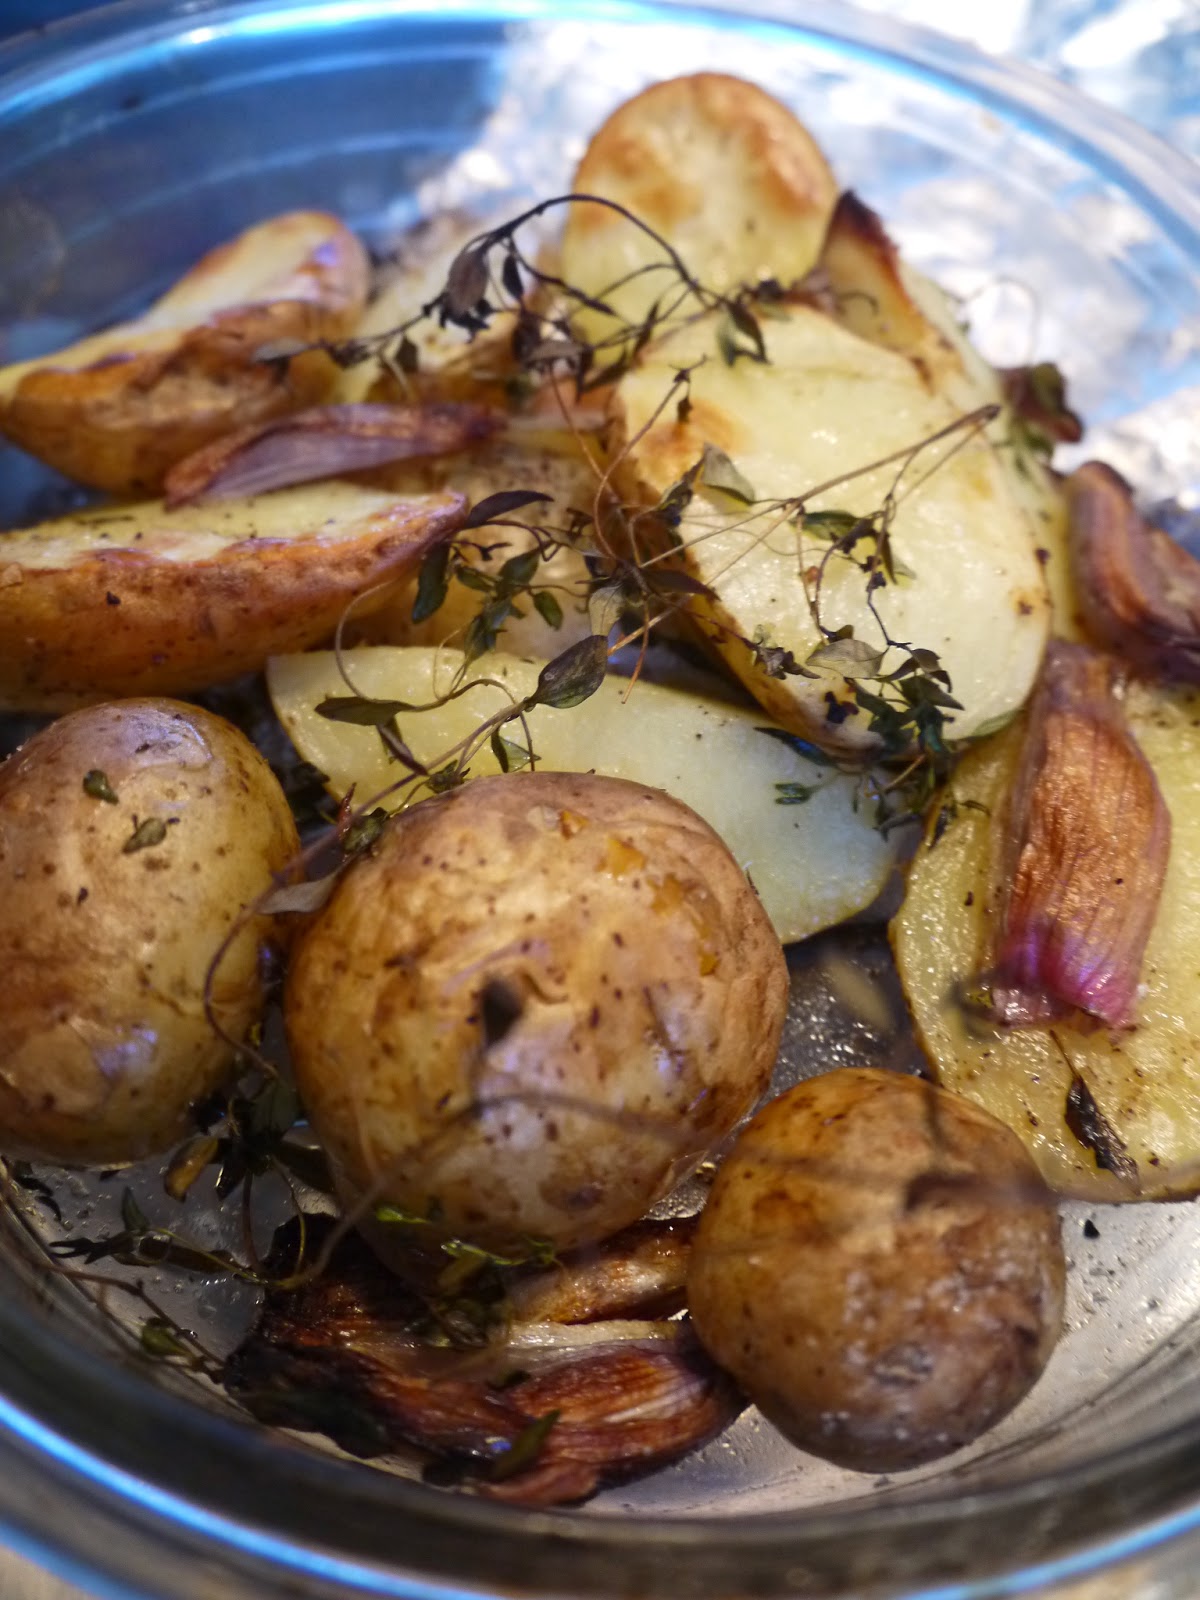 Roasted potatoes with Thyme by Appetit Voyage